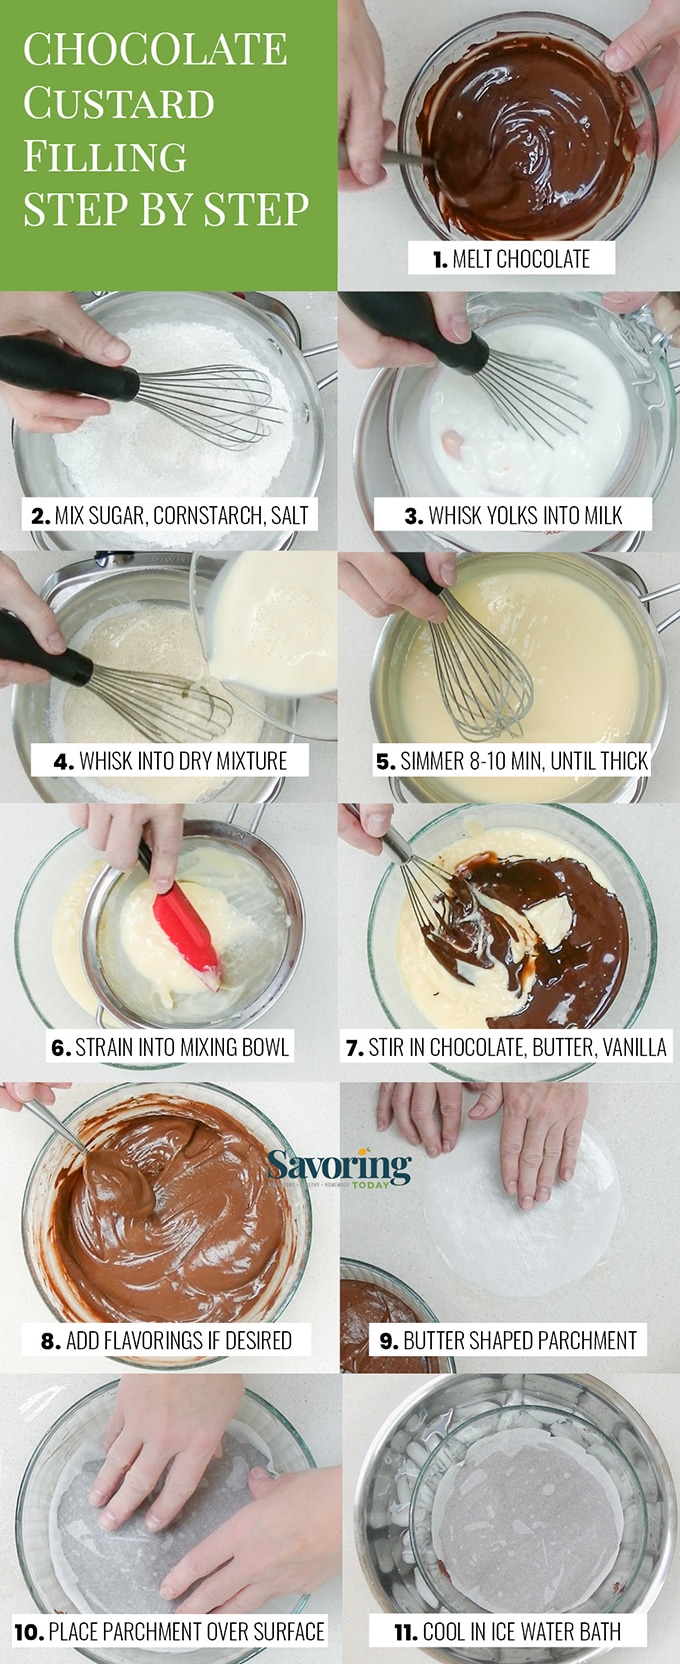 Step by step diagram of how to make chocolate cream custard for pie